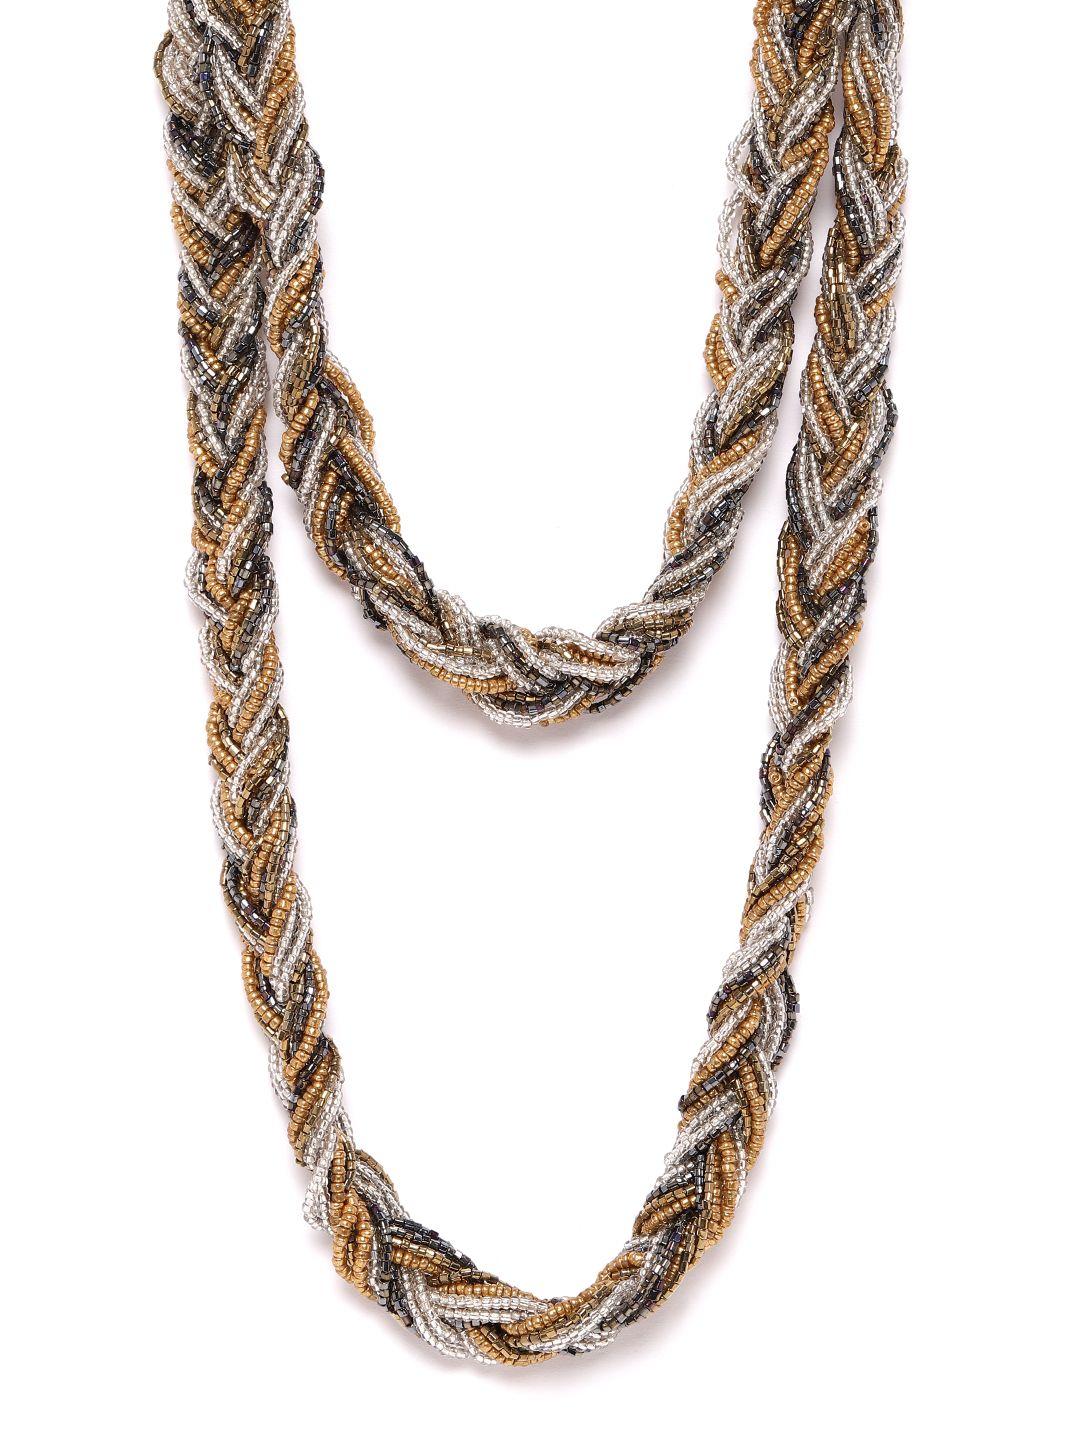 richeera silver& gun metal-toned gold plated braided & layered necklace